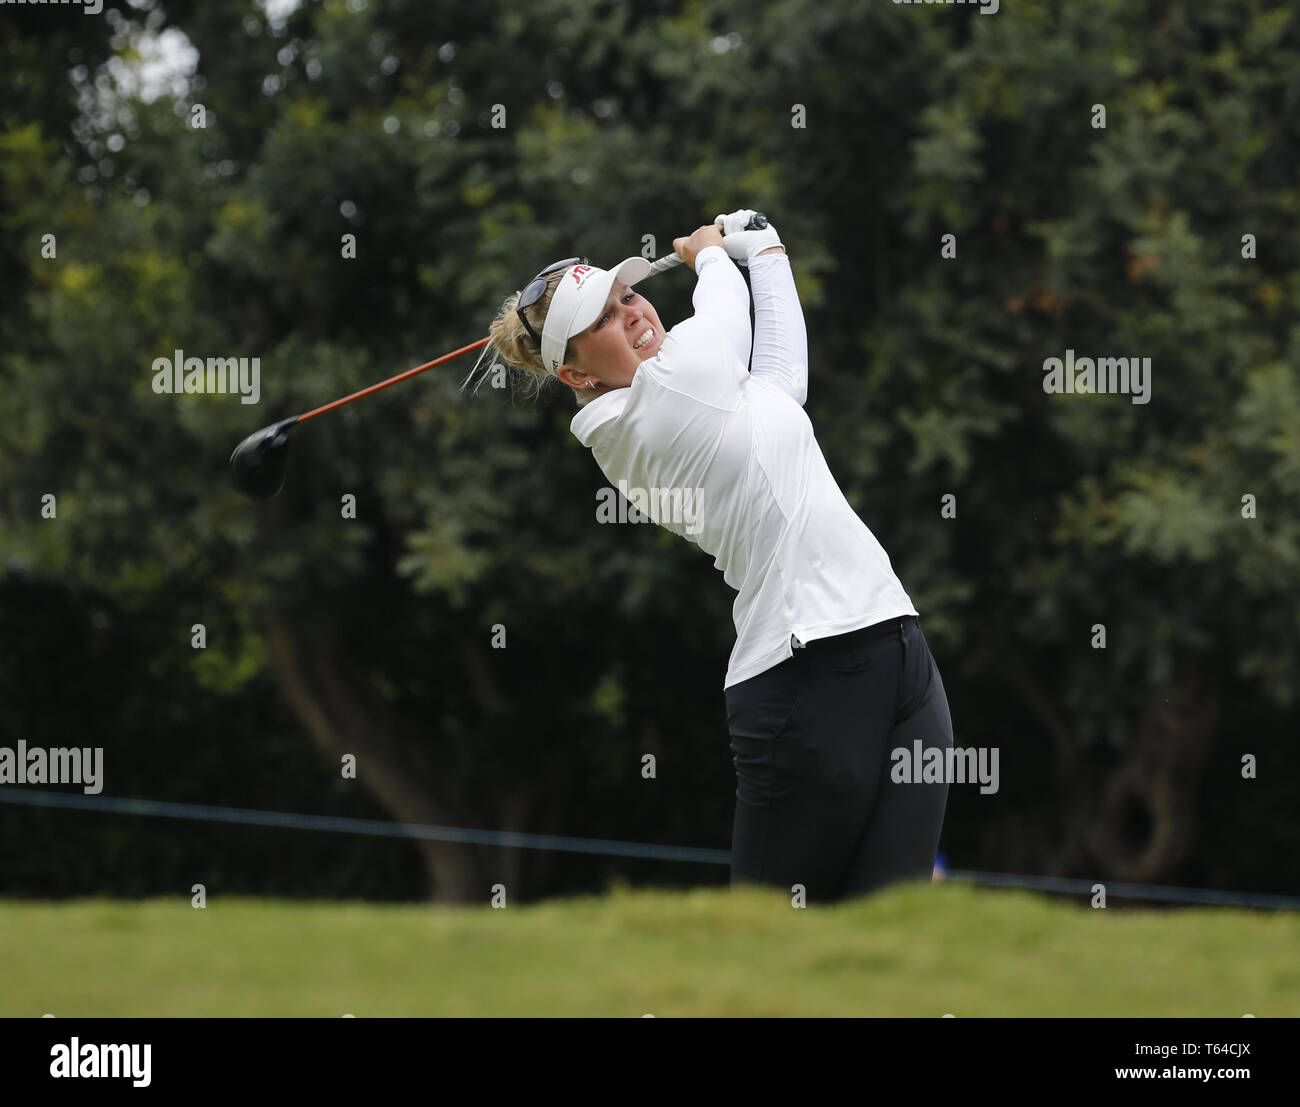 Los Angeles, California, USA. 28th Apr, 2019. Nanna Koerstz Madsen of Denmark in actions during the final round of the HUGEL-AIR PREMIA LA Open LPGA golf tournament at Wilshire Country on April 28, 2019, in Los Angeles. Credit: Ringo Chiu/ZUMA Wire/Alamy Live News Stock Photo